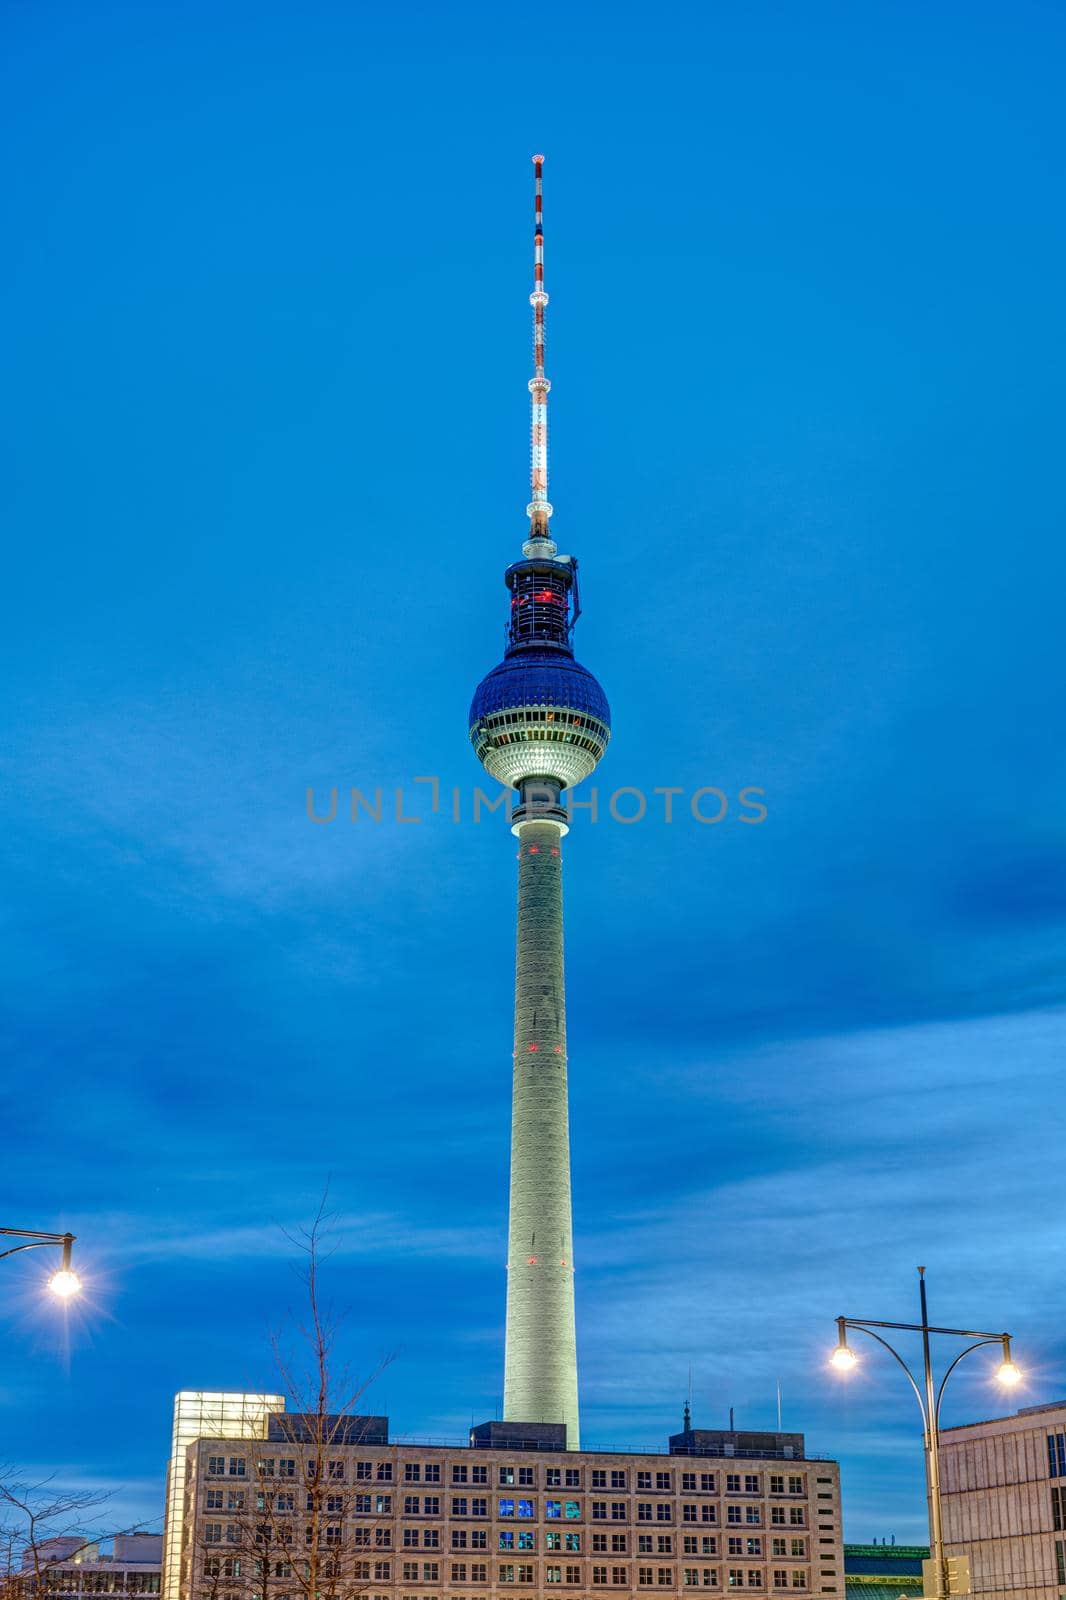 The famous Televison Tower of Berlin at twilight